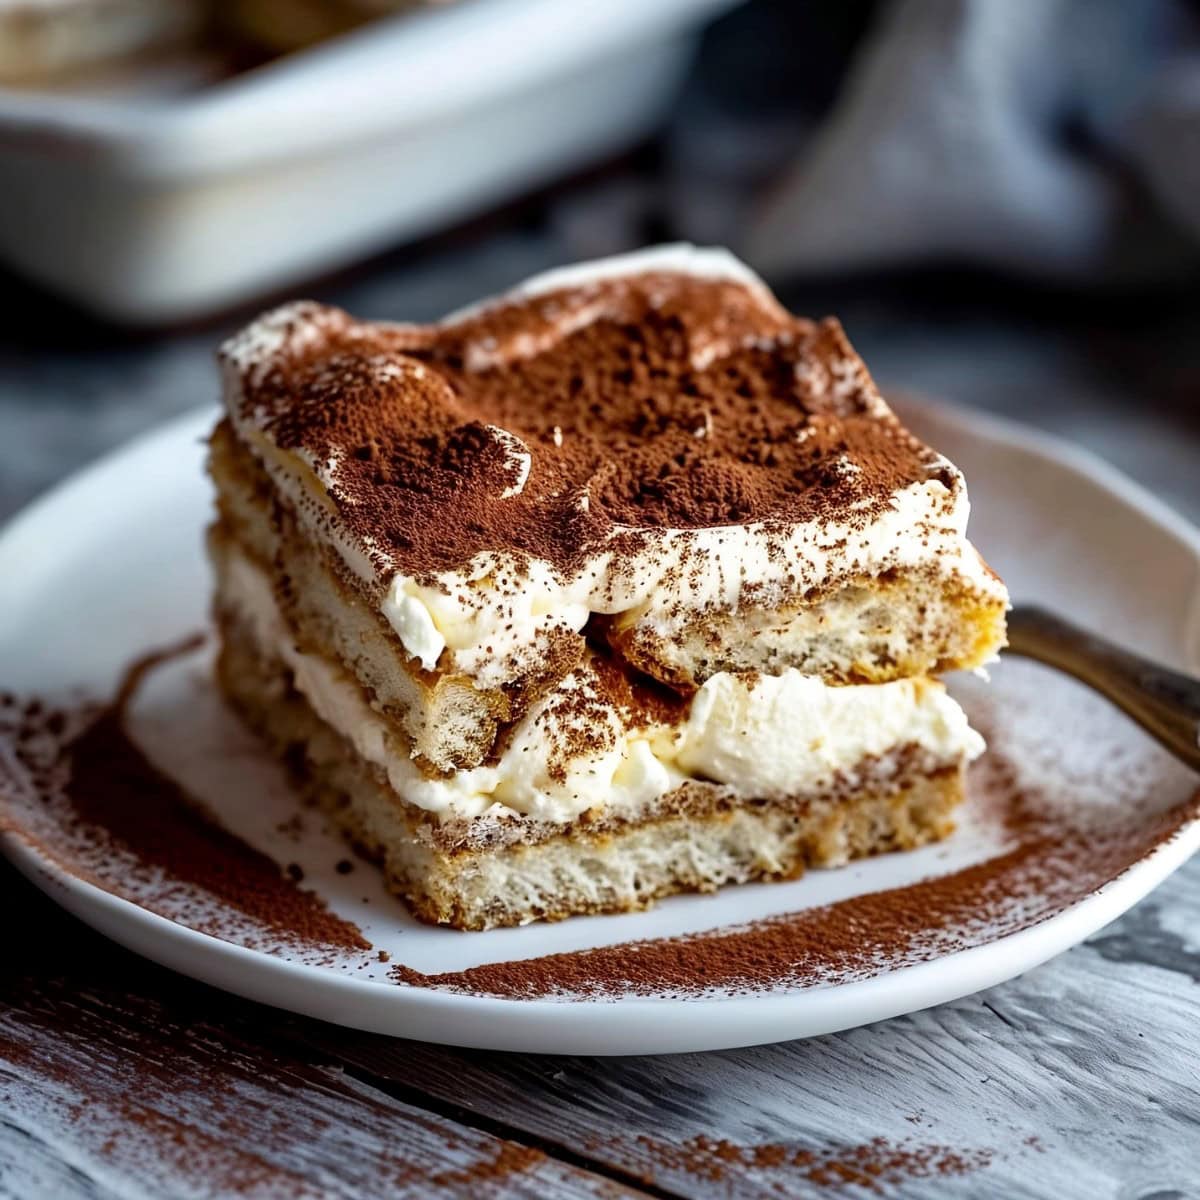 Slice of Tiramisu on a Plate with a Fork and the Rest of the Tiramisu in a Casserole Dish in the Background